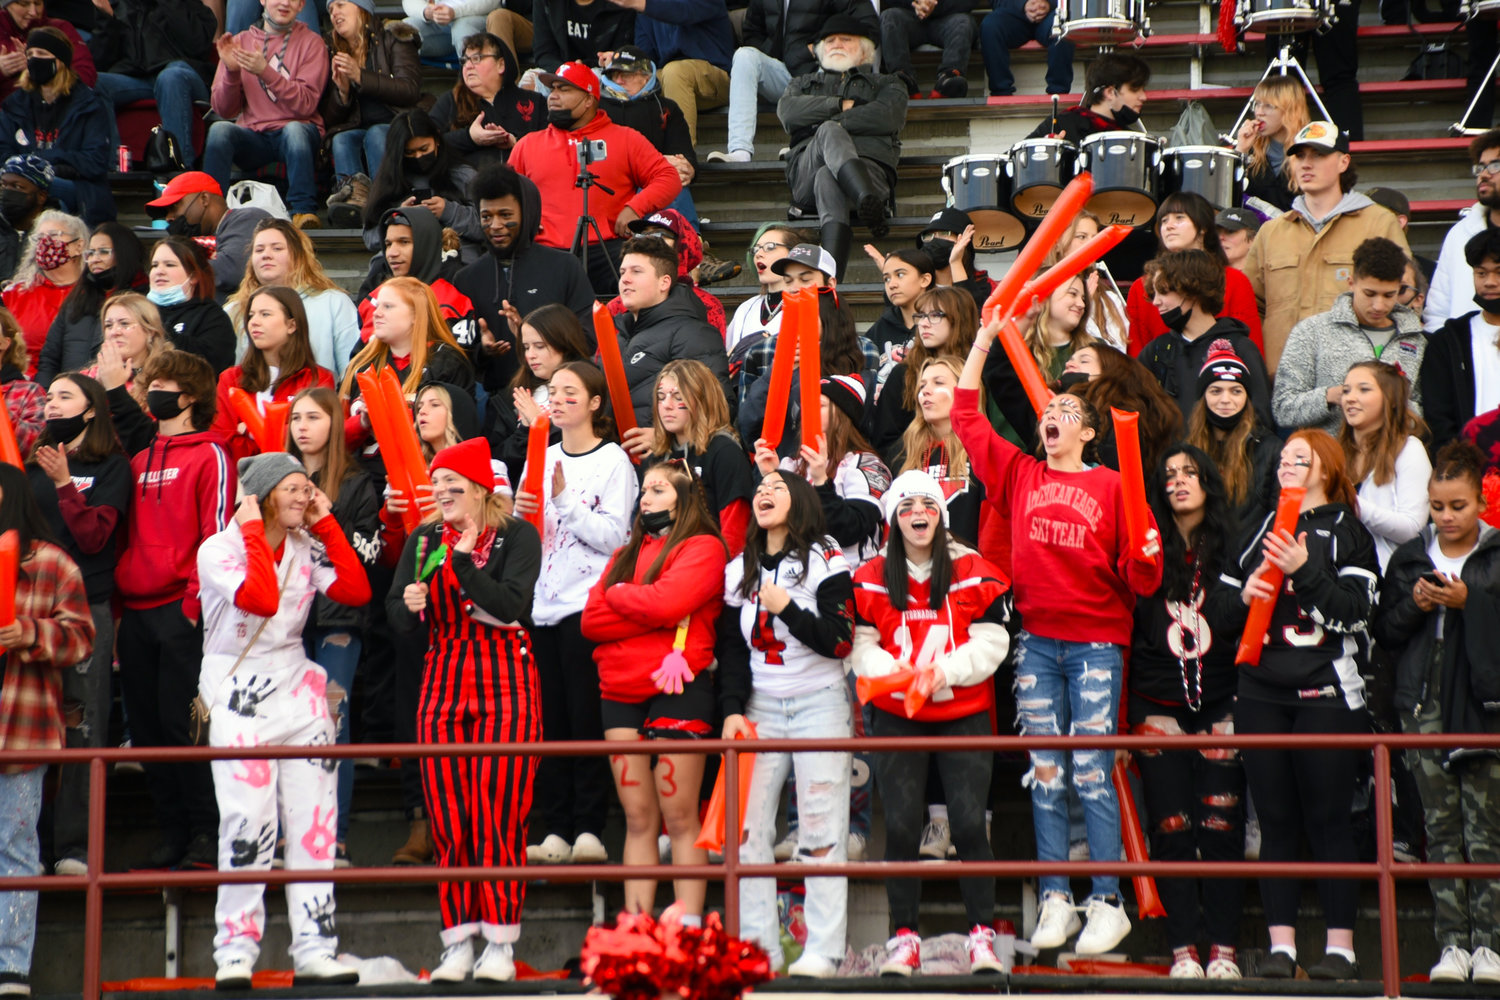 Fans cheer for Yelm in a quarter finals game against Marysville-Pilchuck.